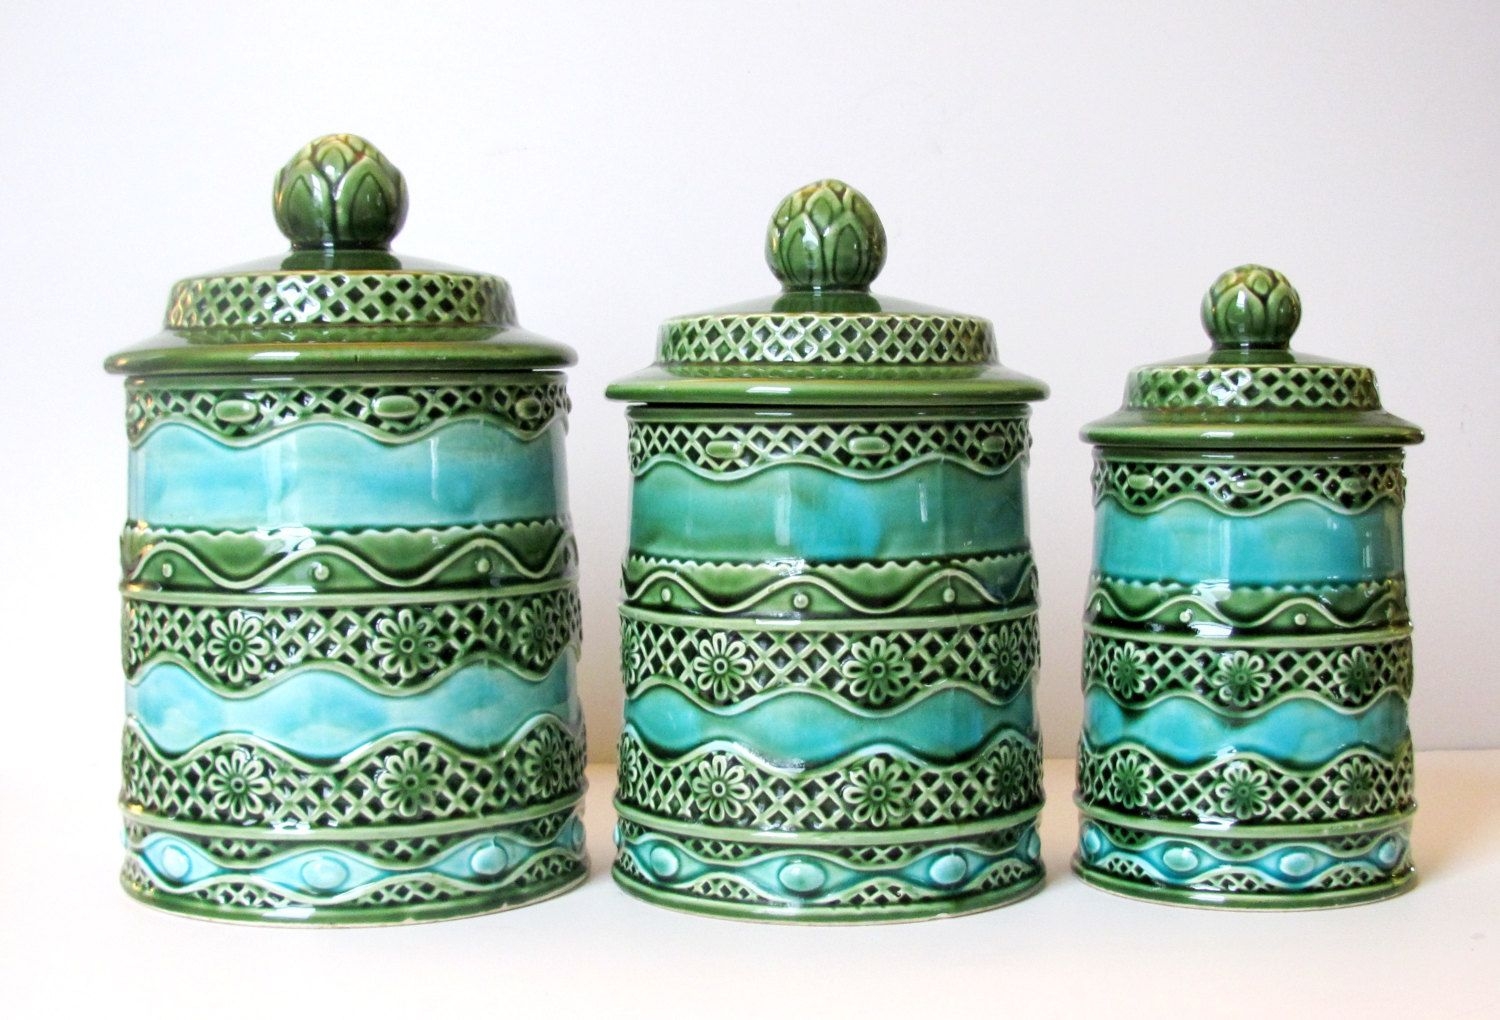 Decorative kitchen canisters retro kitchen canisters green blue